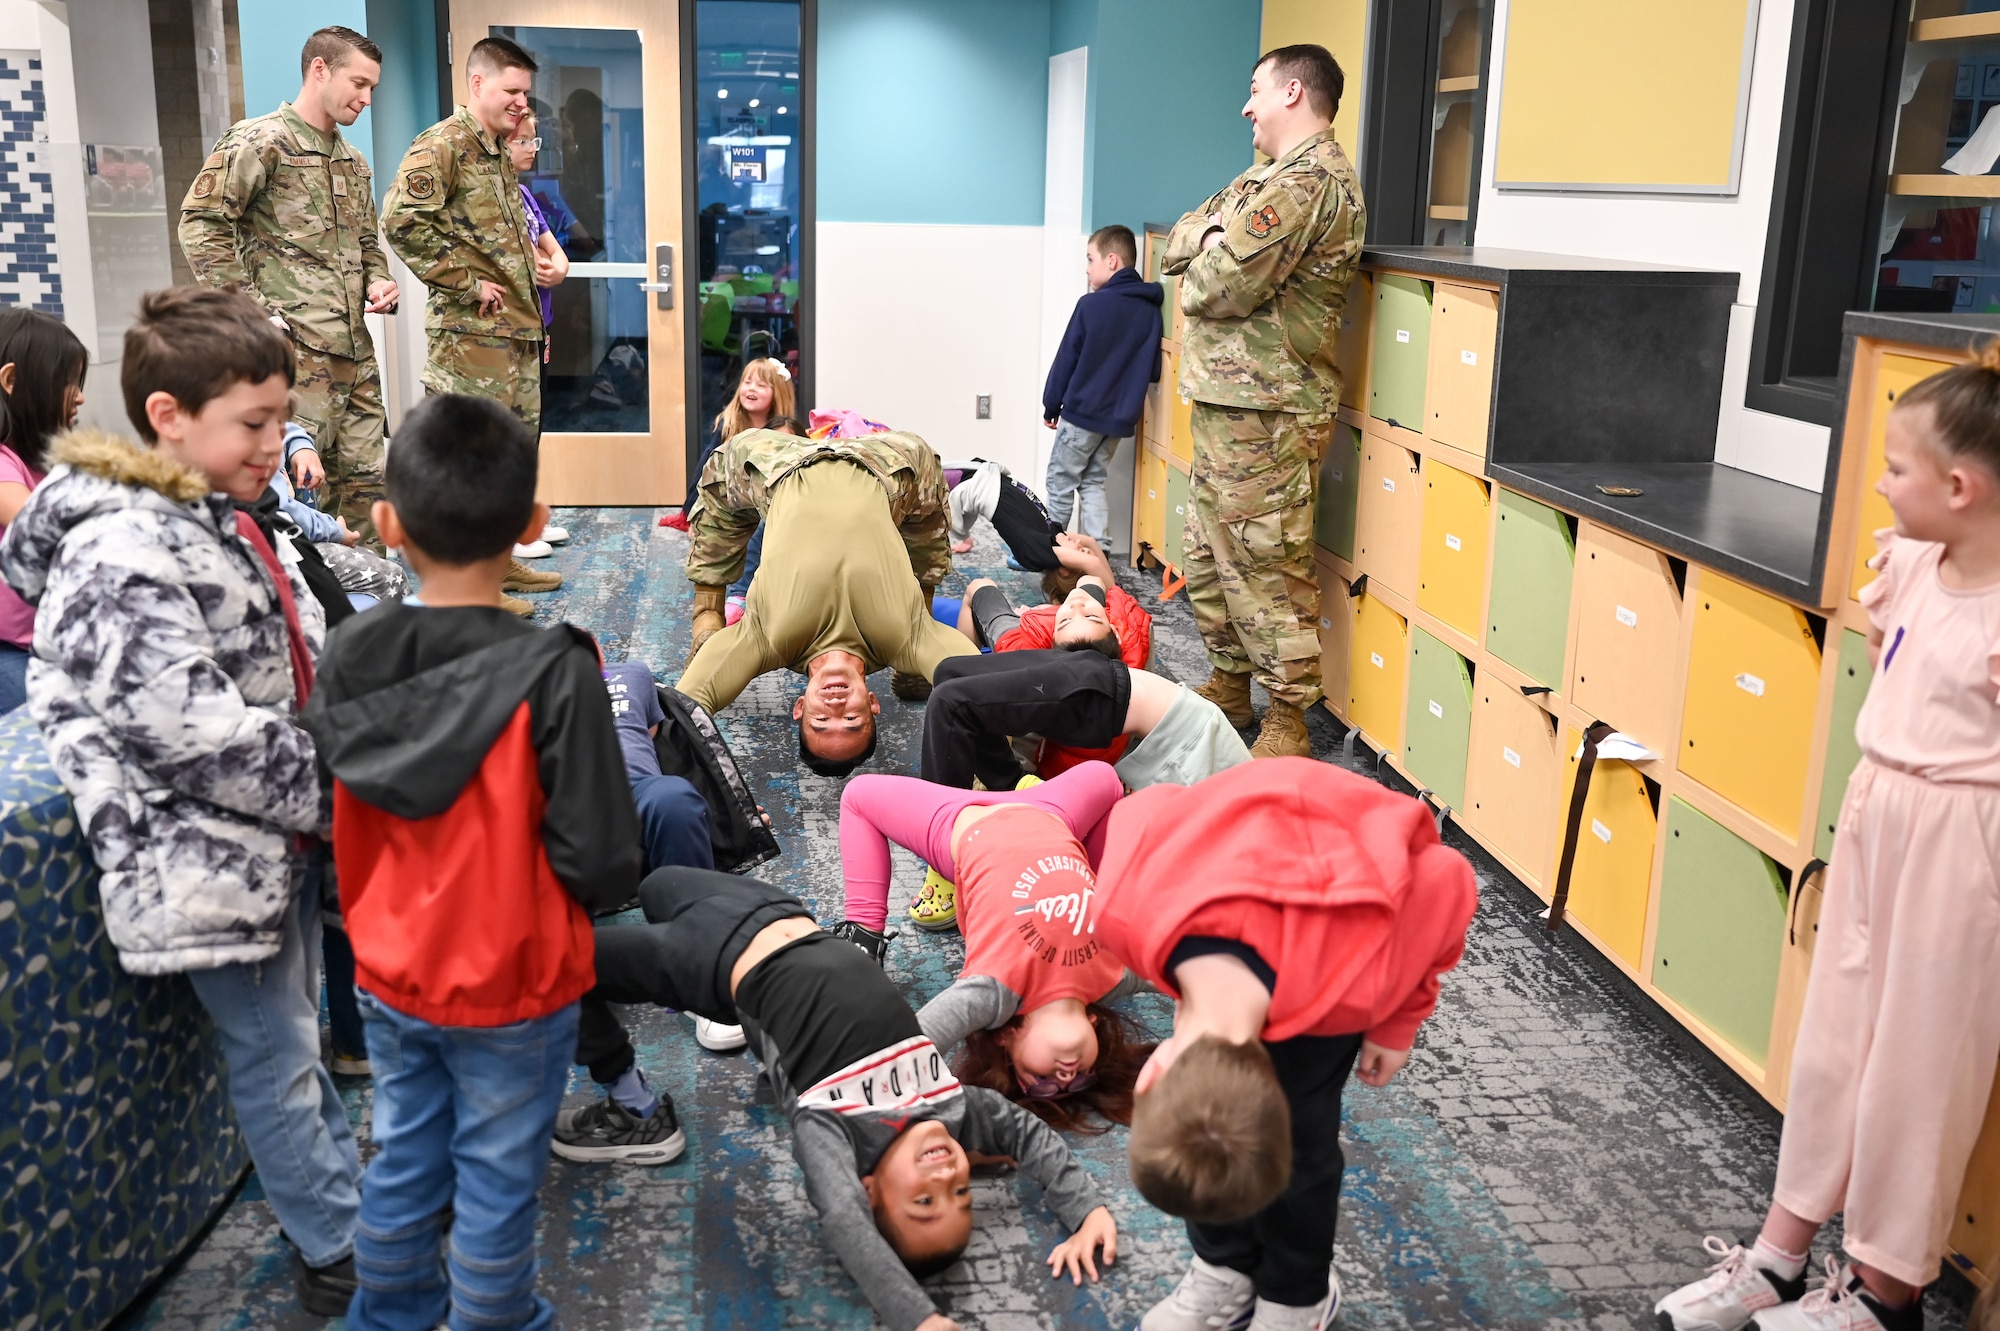 Technical Sgt. Justin Southichack, 367th Training Support Squadron, backbends with South Clearfield Elementary students April 18, 2023, in Clearfield, Utah. The Airmen visited the school to engage with the community during the Month of the Military Child. (U.S. Air Force photo by Cynthia Griggs)